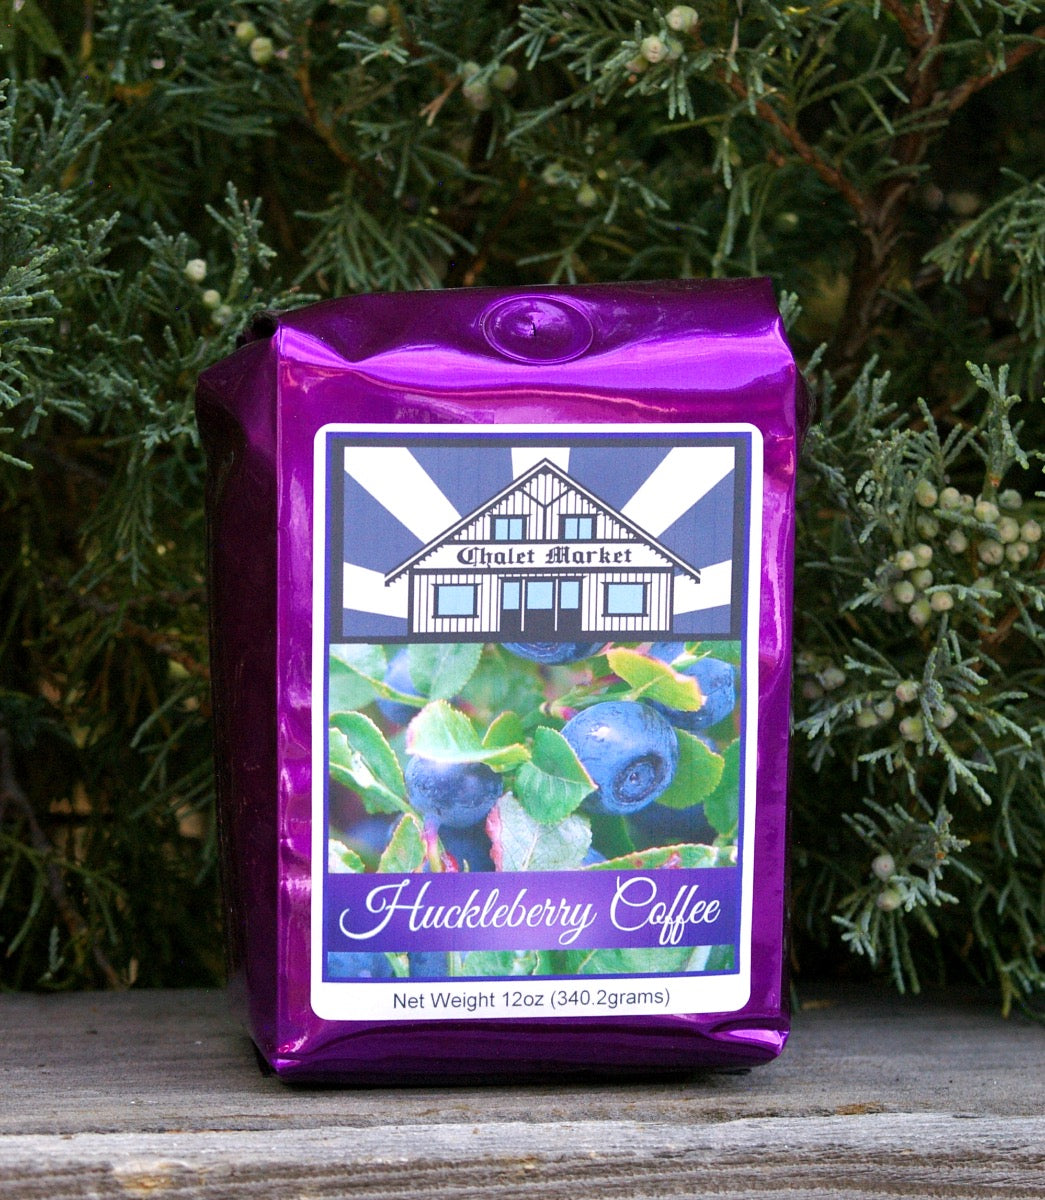 Chalet Market Huckleberry flavored coffee.  Made in Montana.  Montana gourmet coffee.